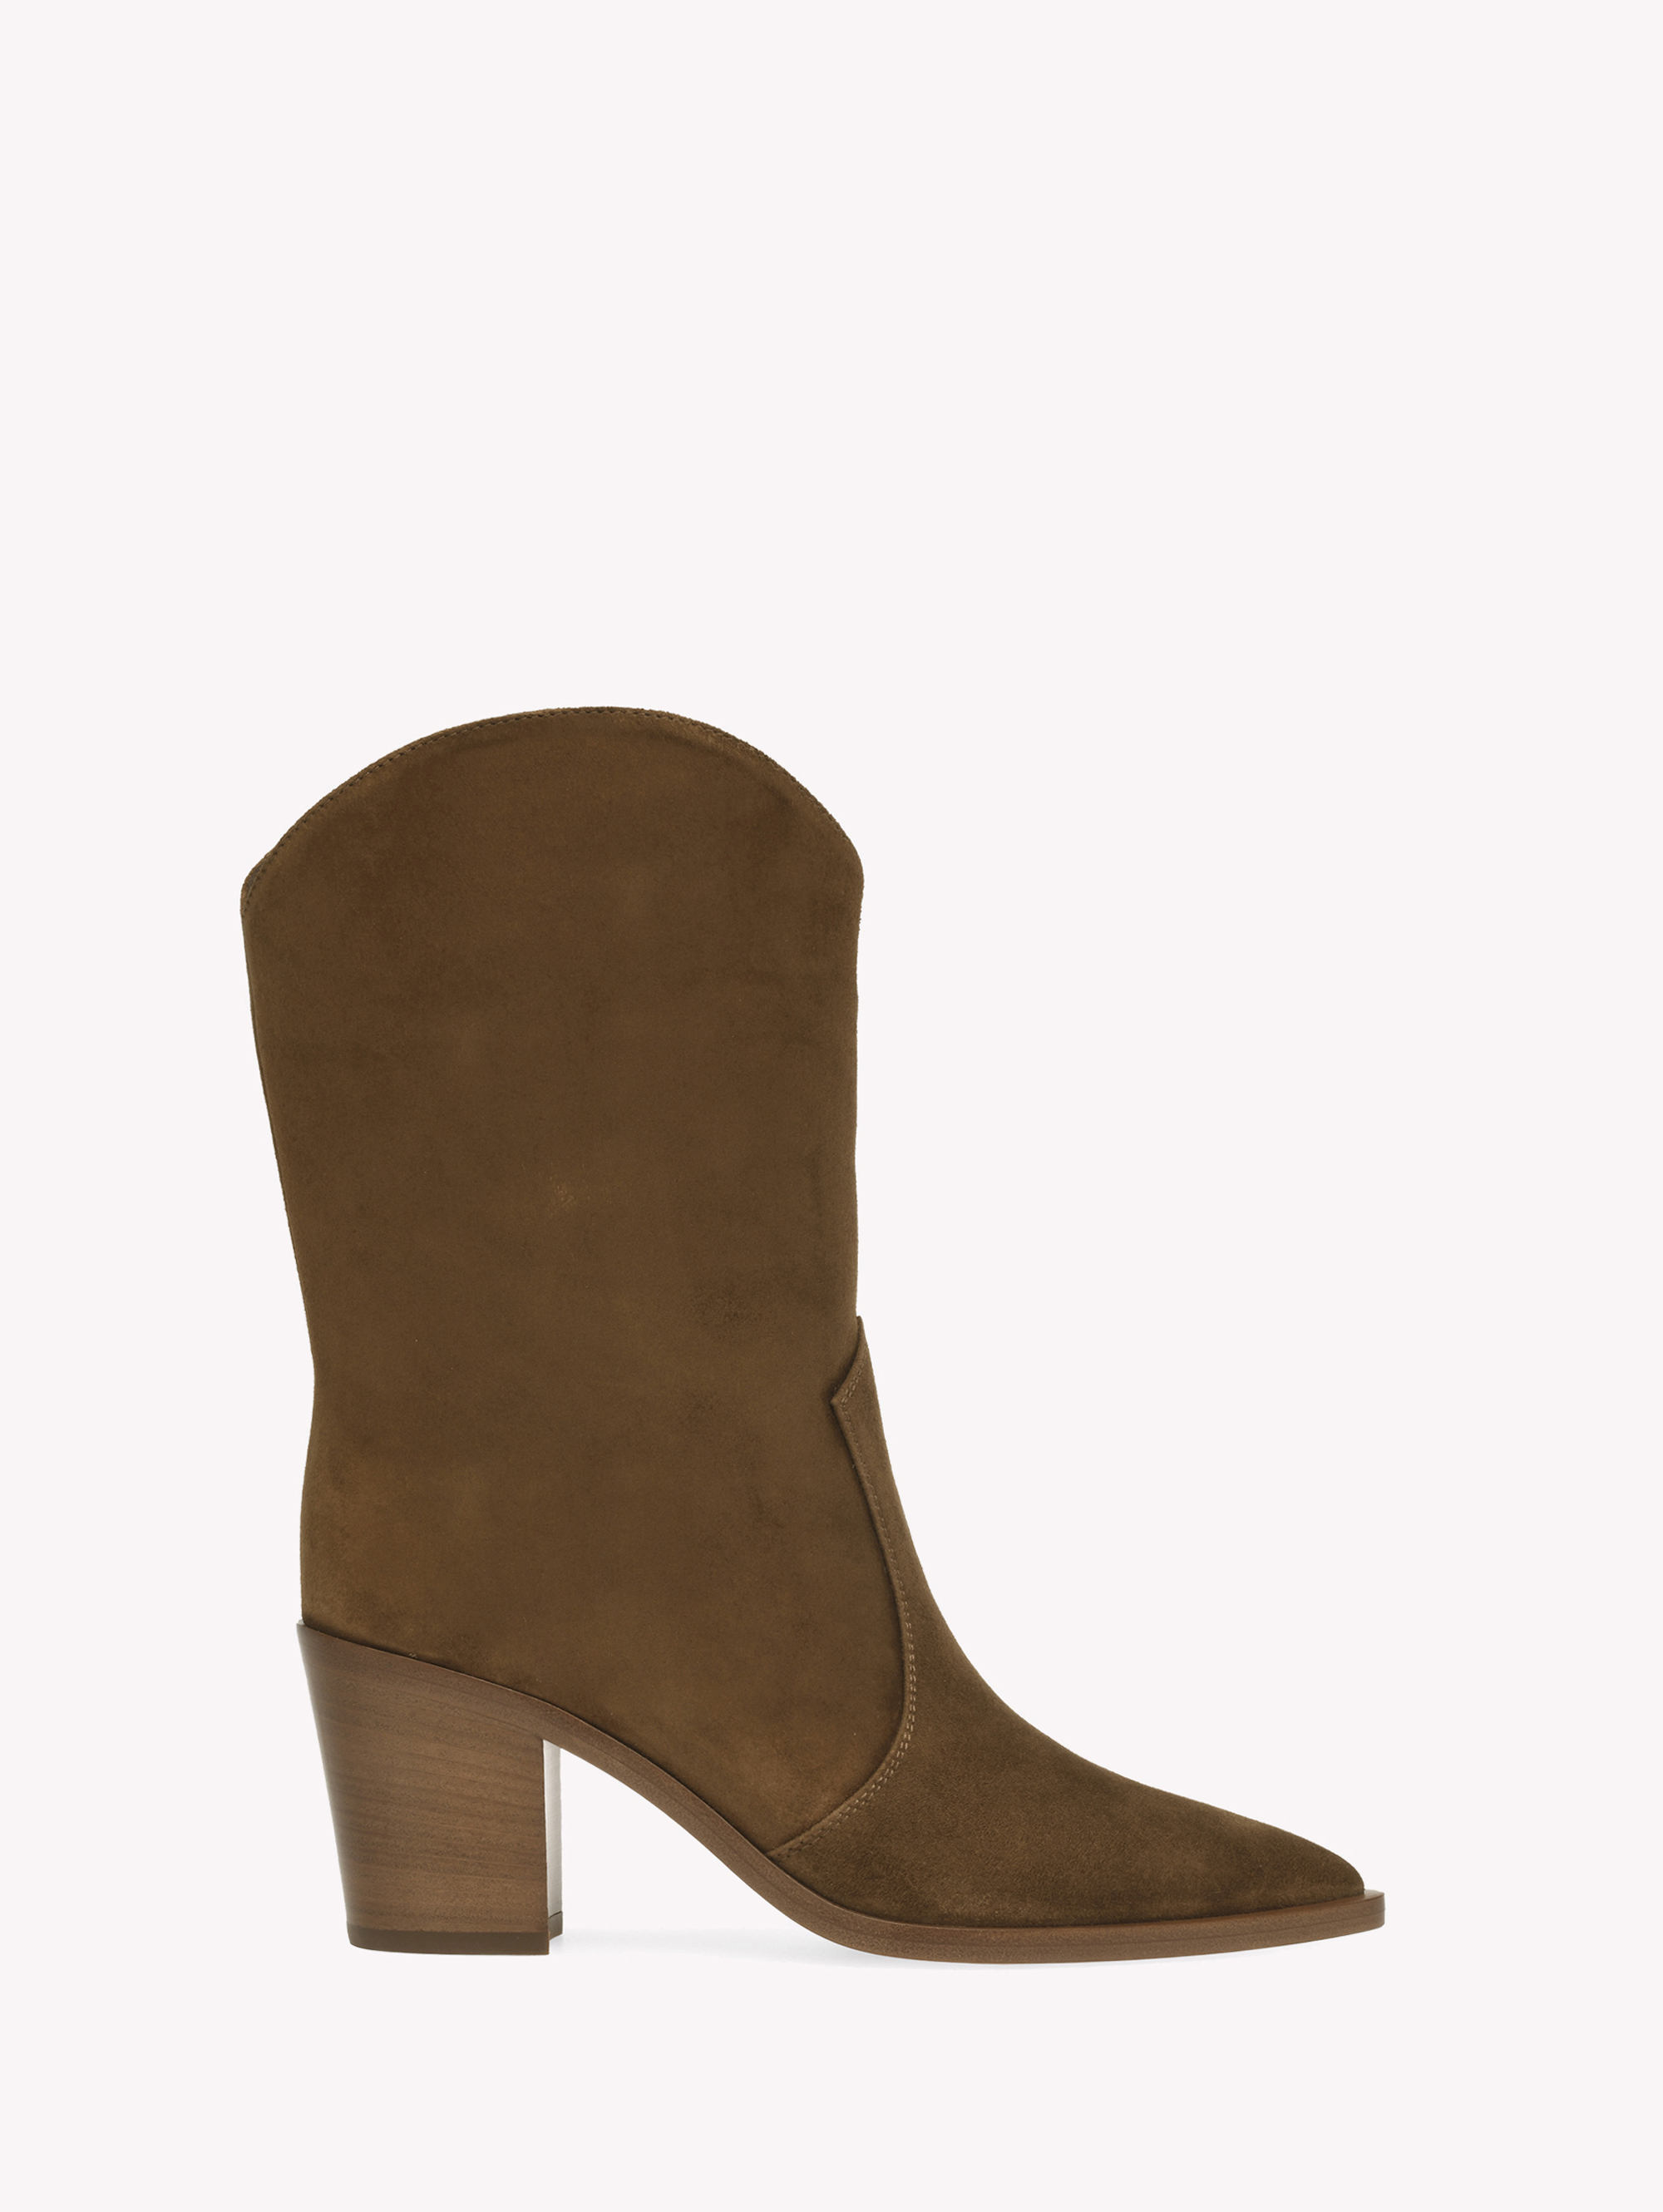 Ankle Boots for Women DENVER | Gianvito Rossi